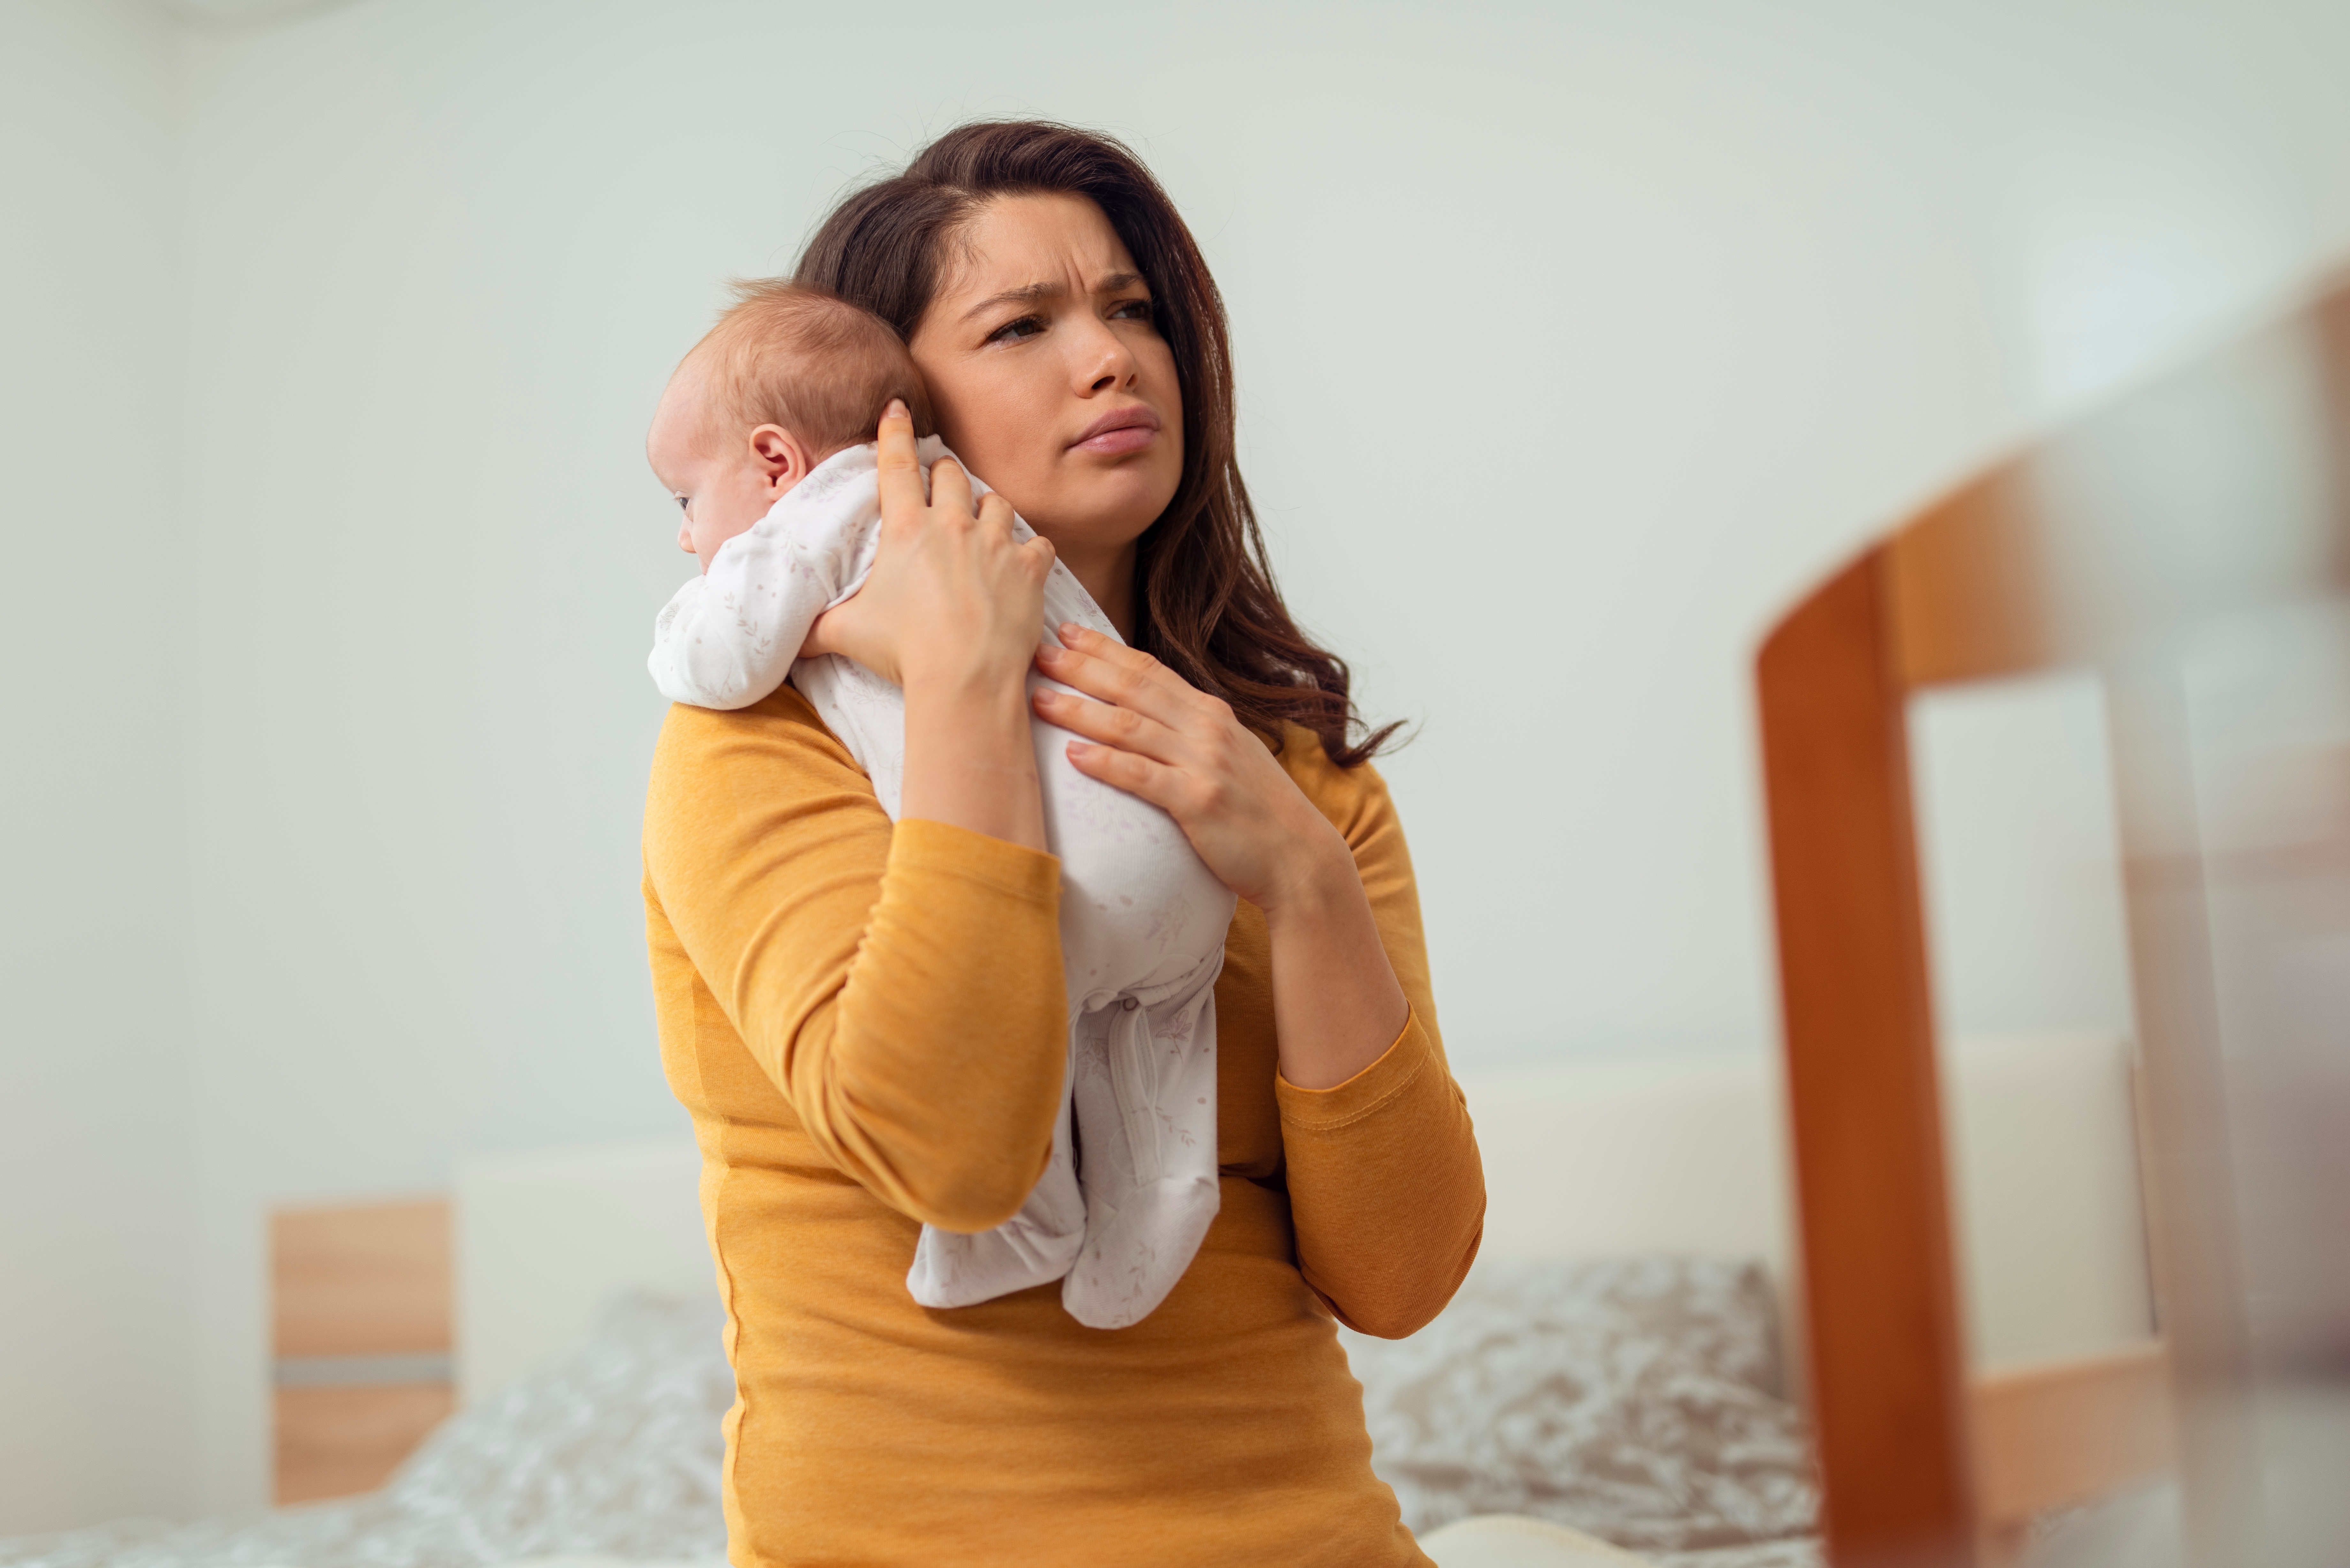 A woman looking tired while holding a baby | Source: Shutterstock